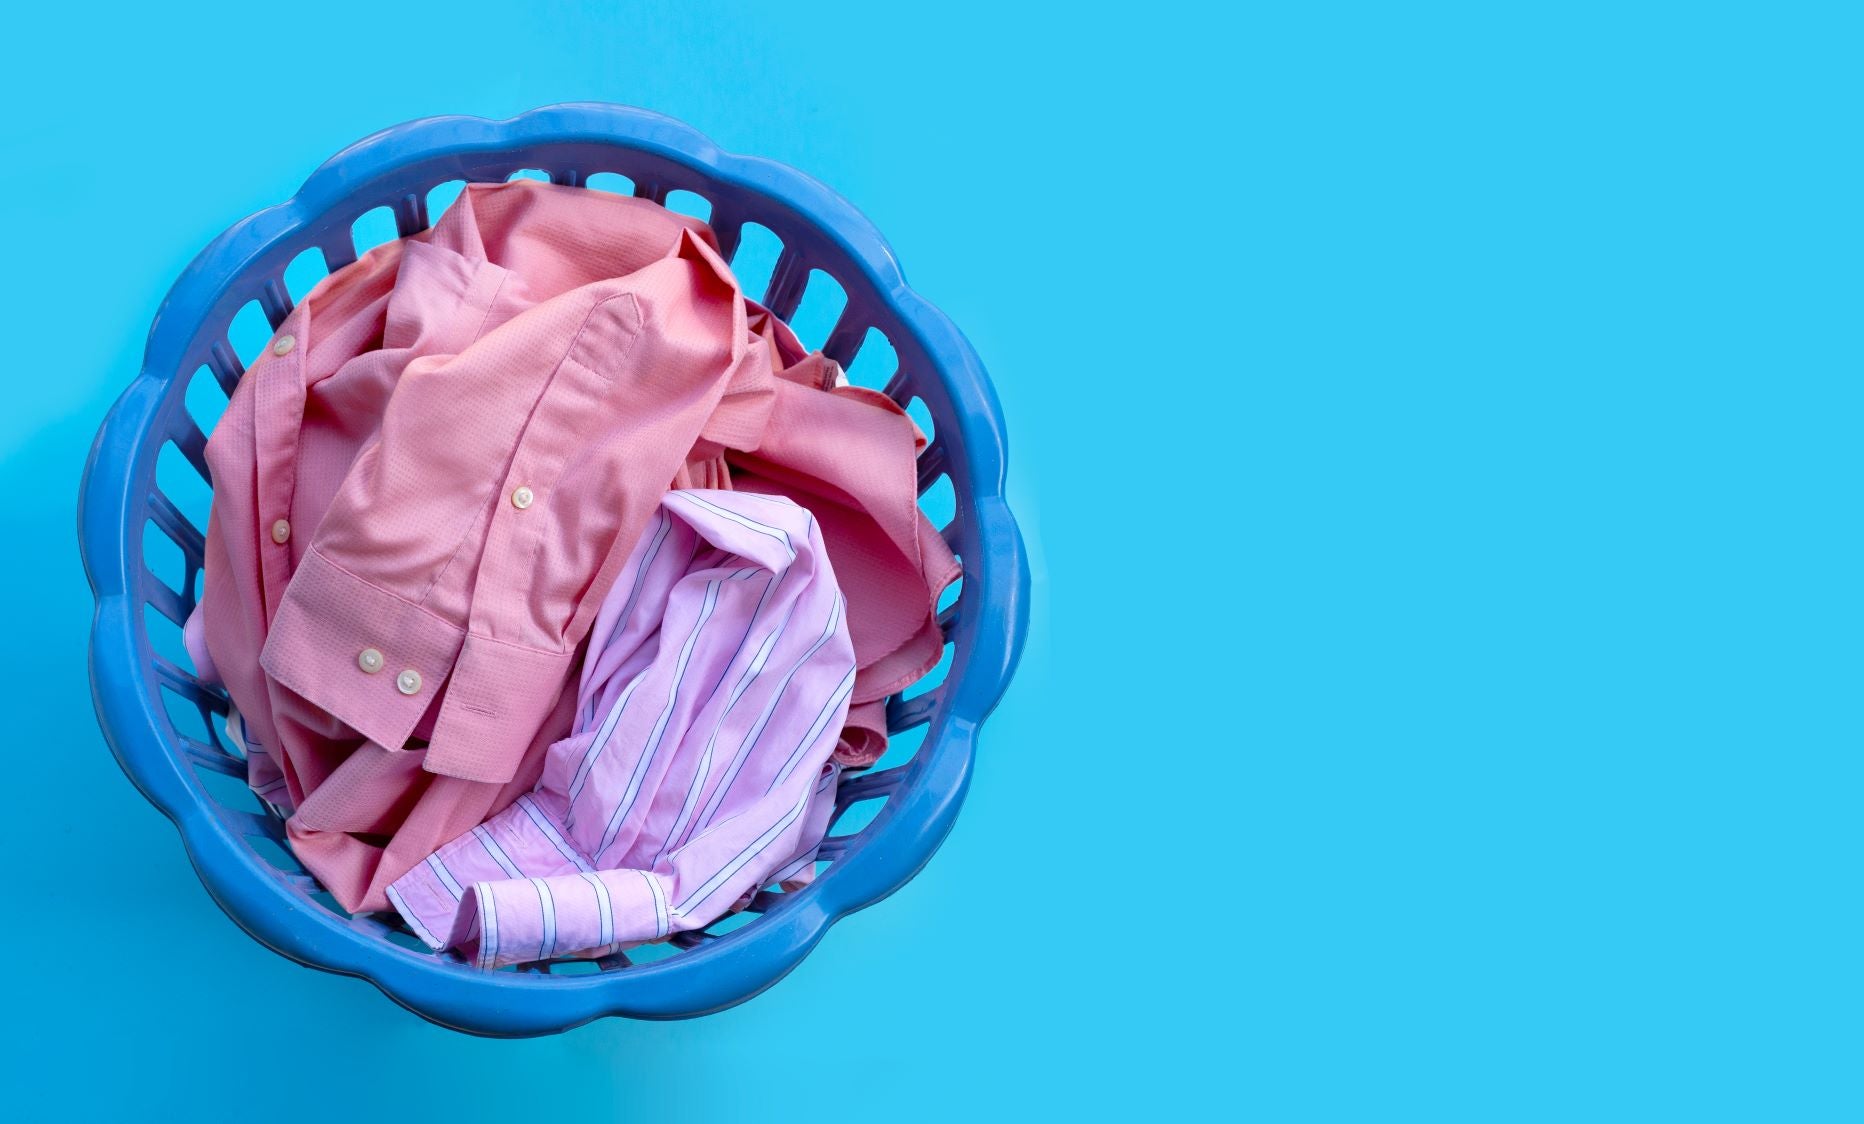 Pick Up Dirty Clothes And Place Them In Your Laundry Basket